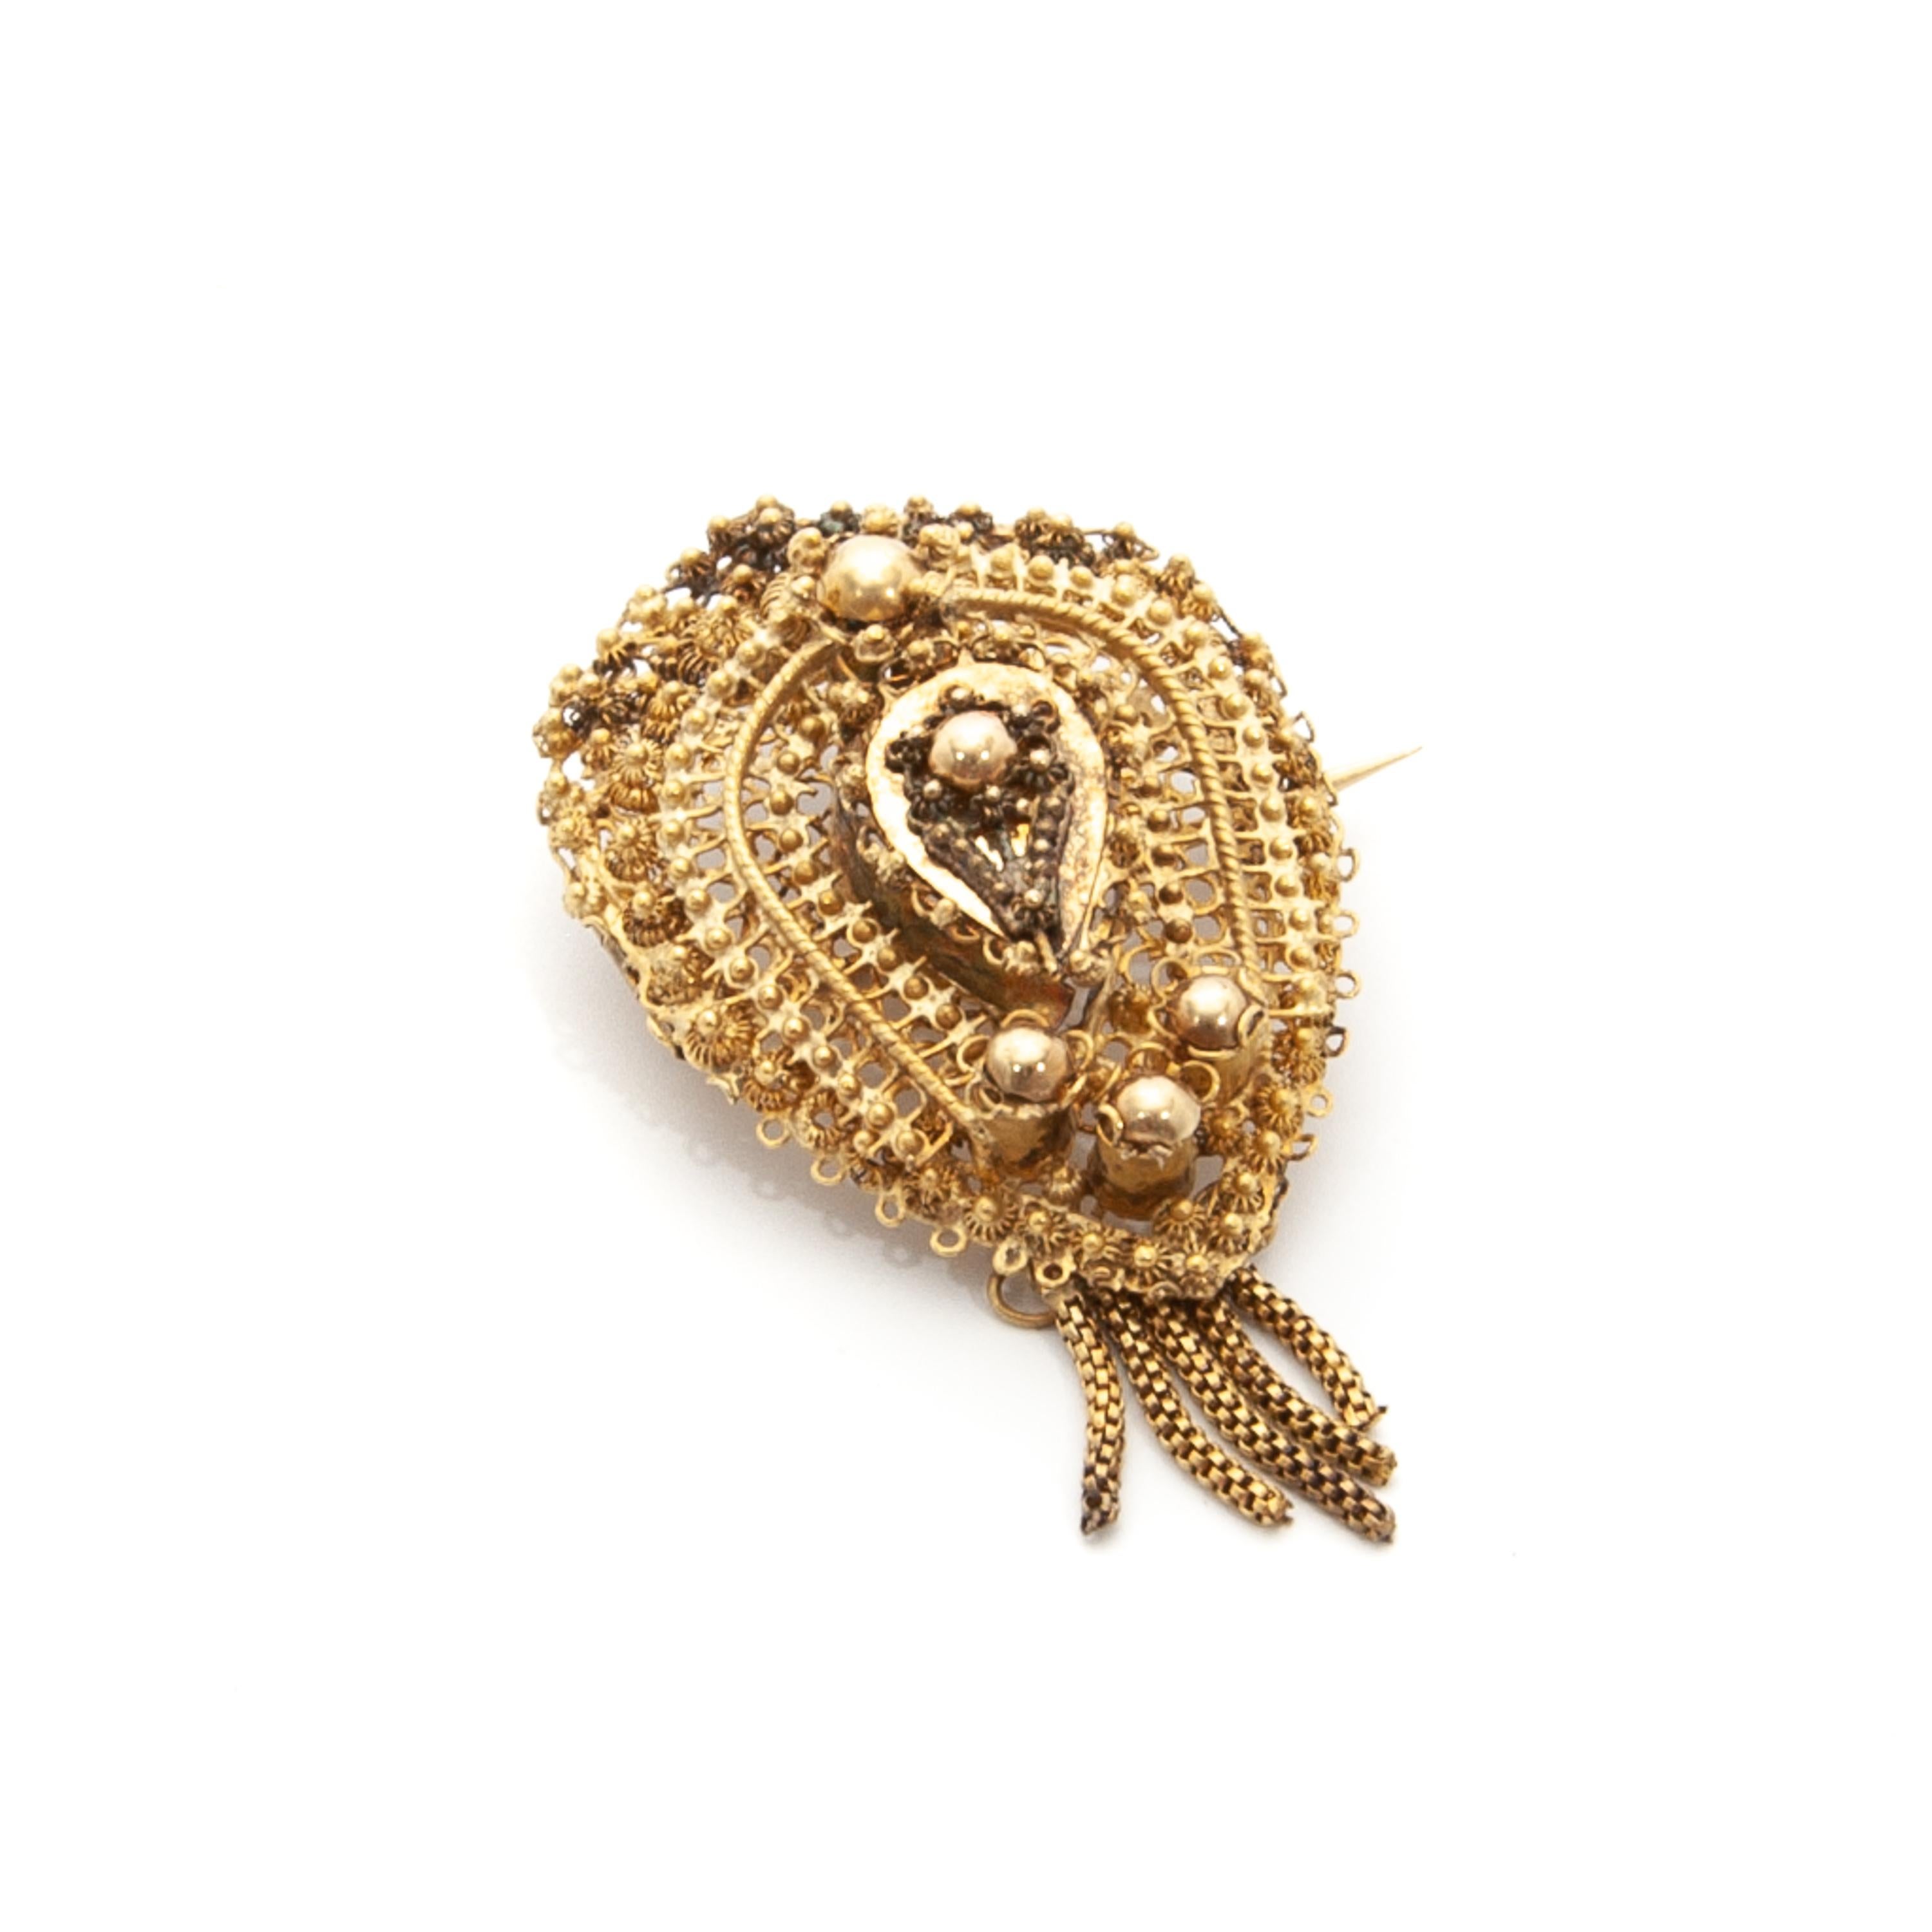 Antique 1880's 14K Gold Filigree Earrings and Brooch For Sale 2